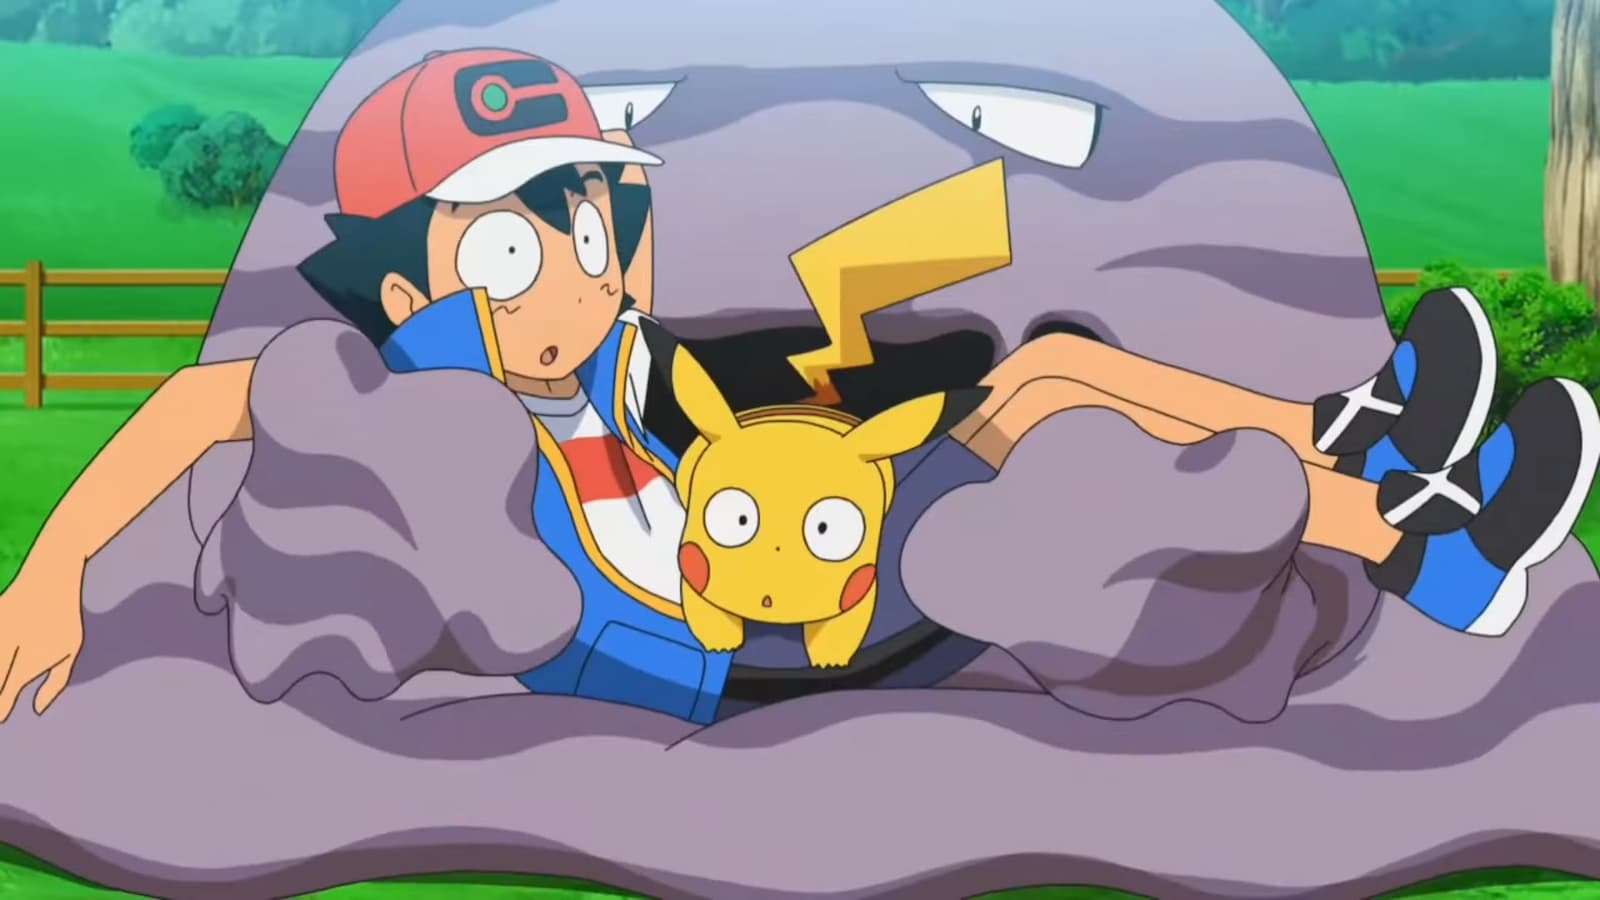 Ash and Pikachu in the grip of his Muk